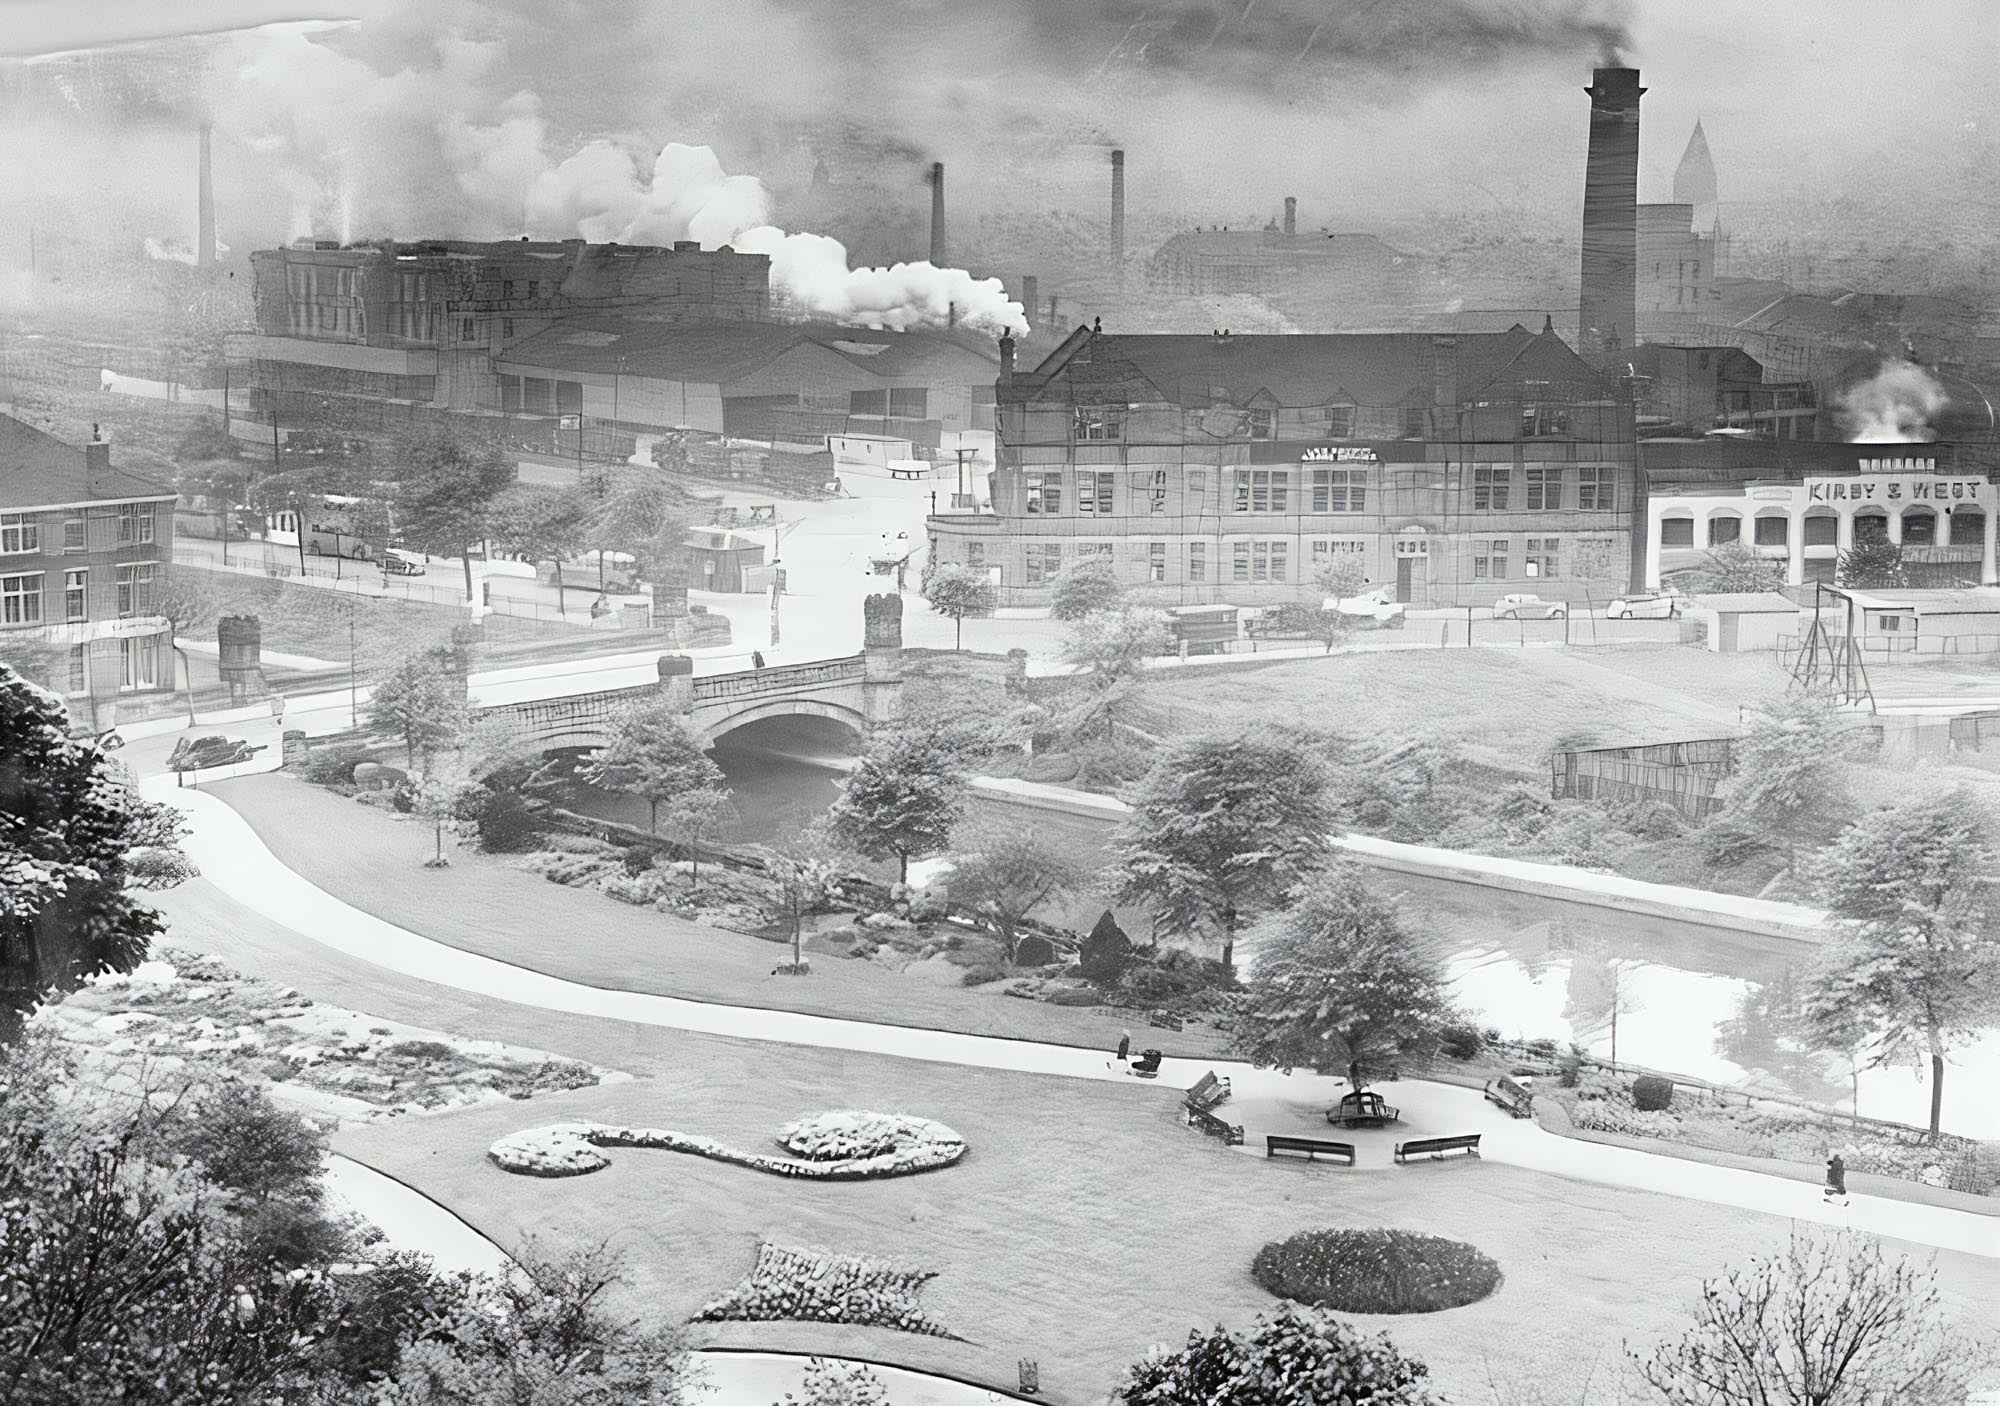 View of the Kirby & West building (far right) and Castle Gardens -